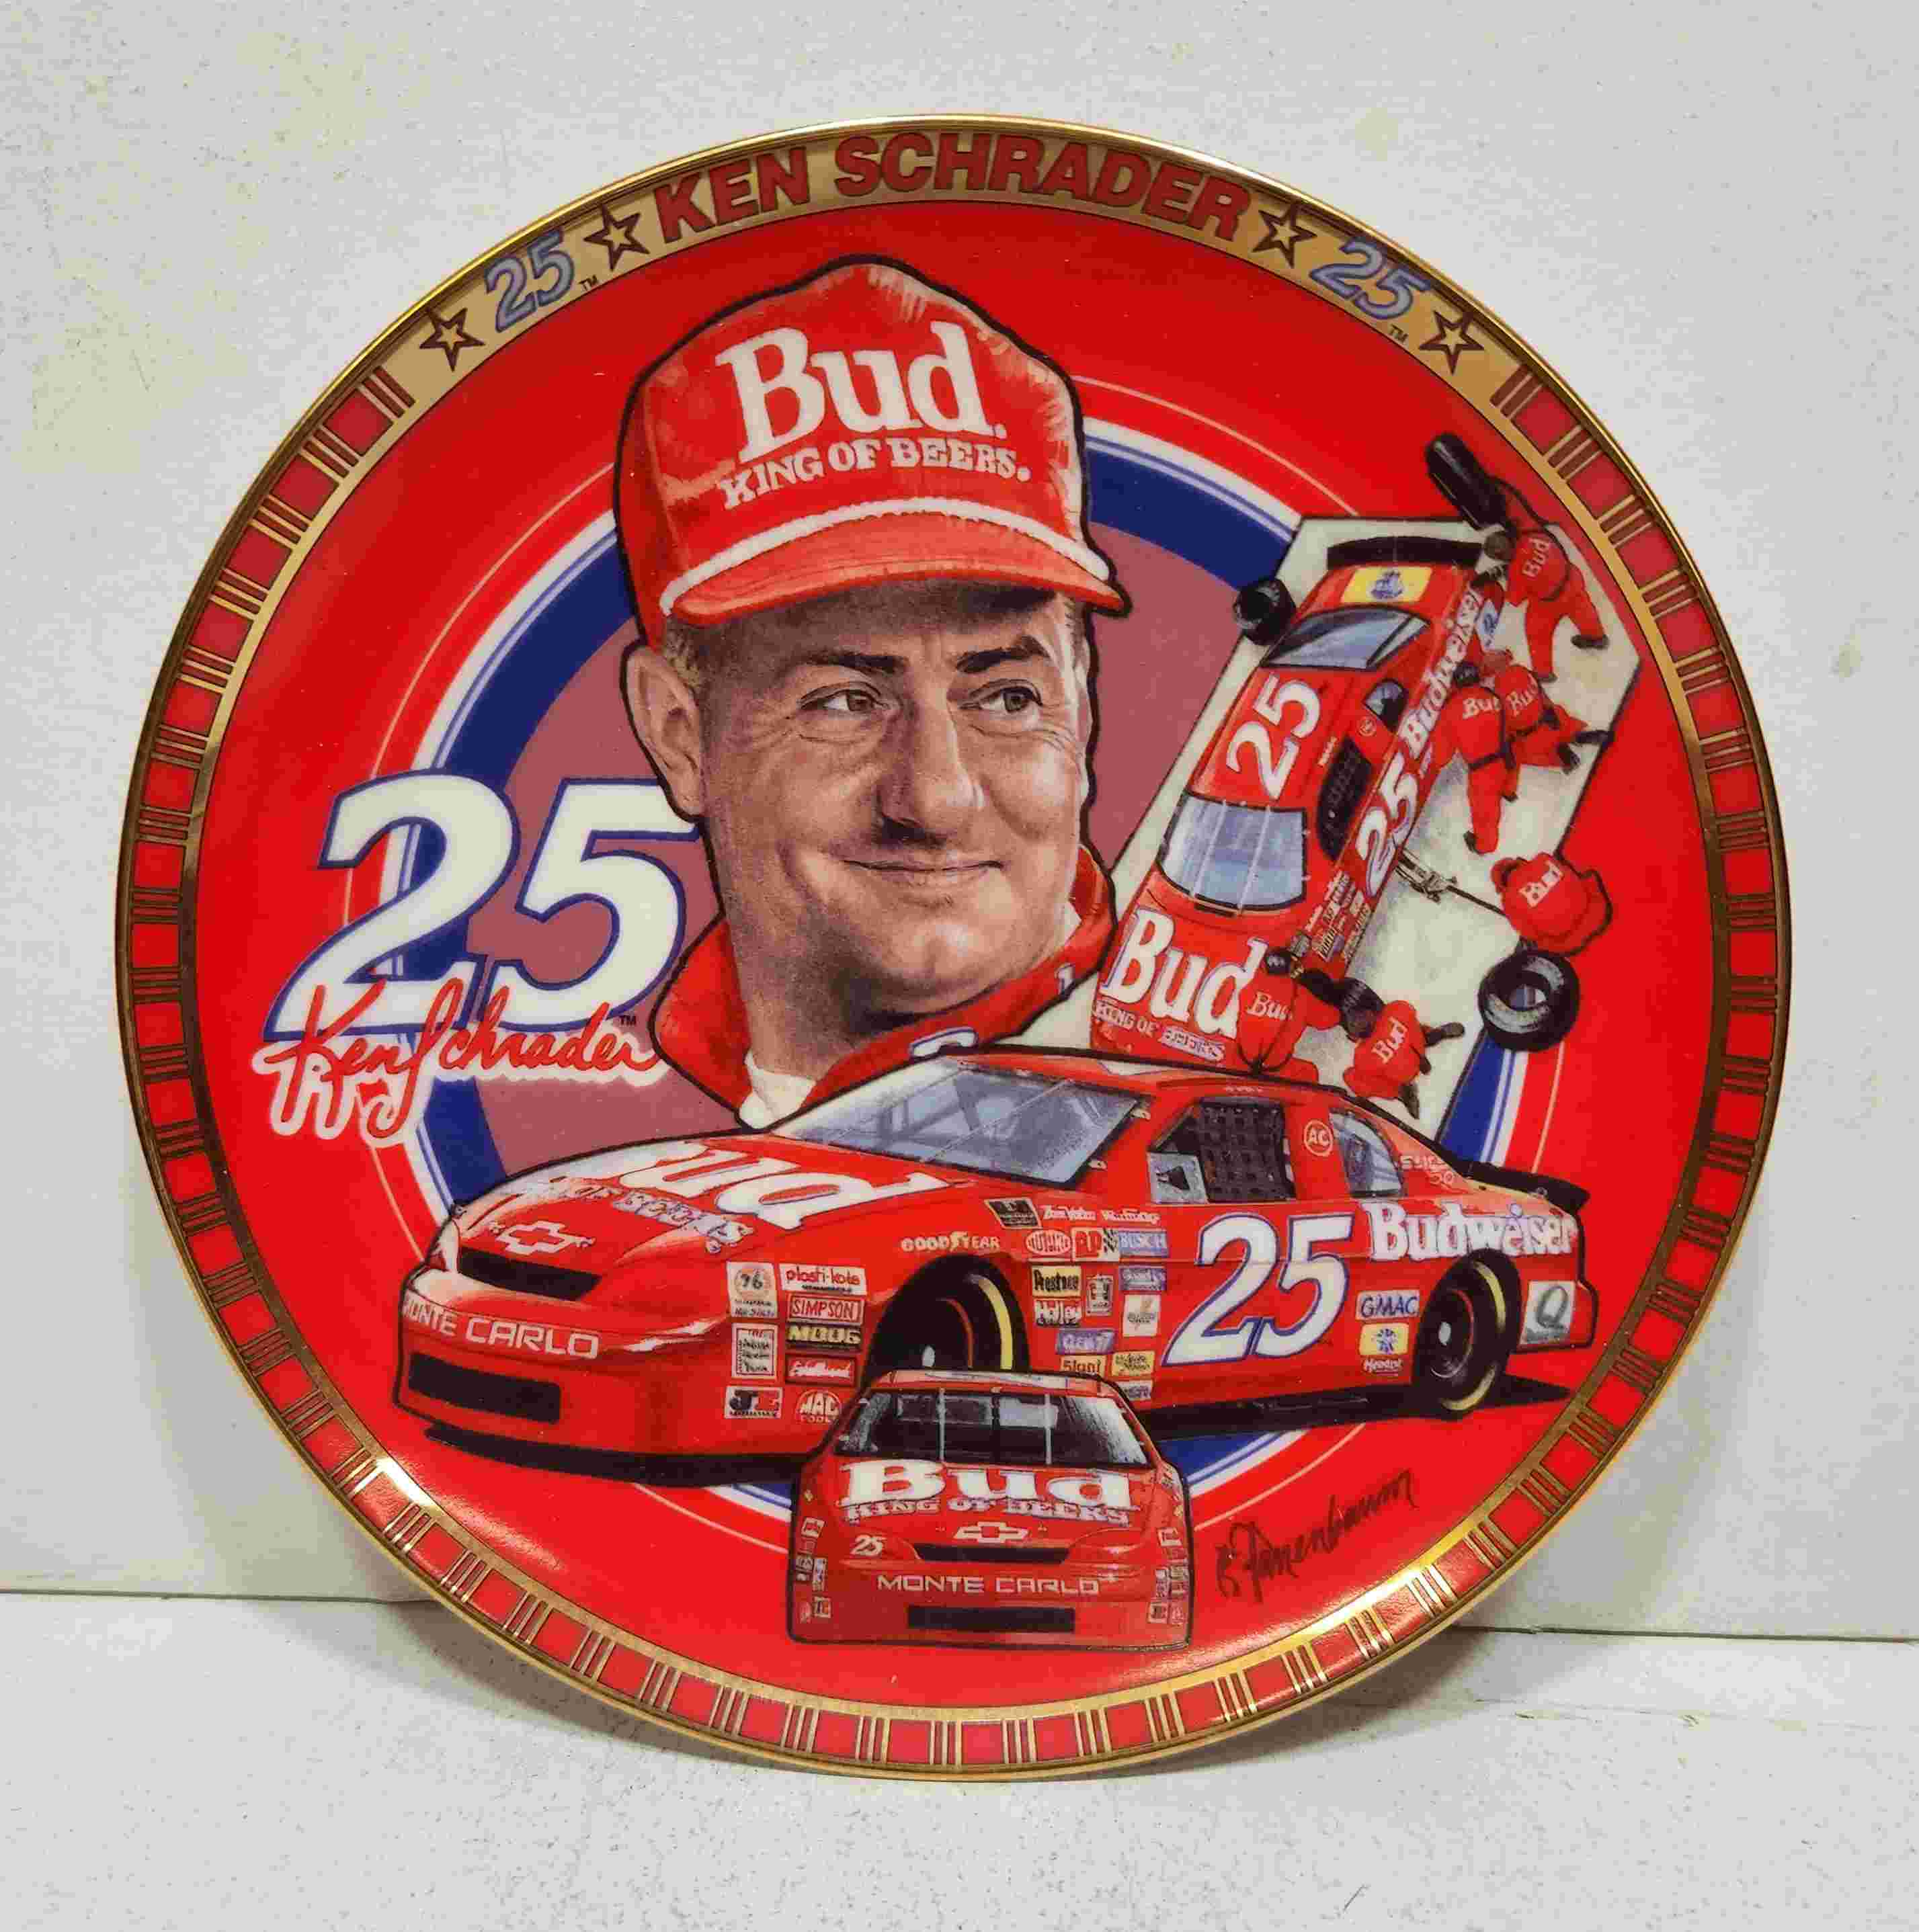 1996 Ken Schrader Driver of Victory Lane by The Hamilton Collection